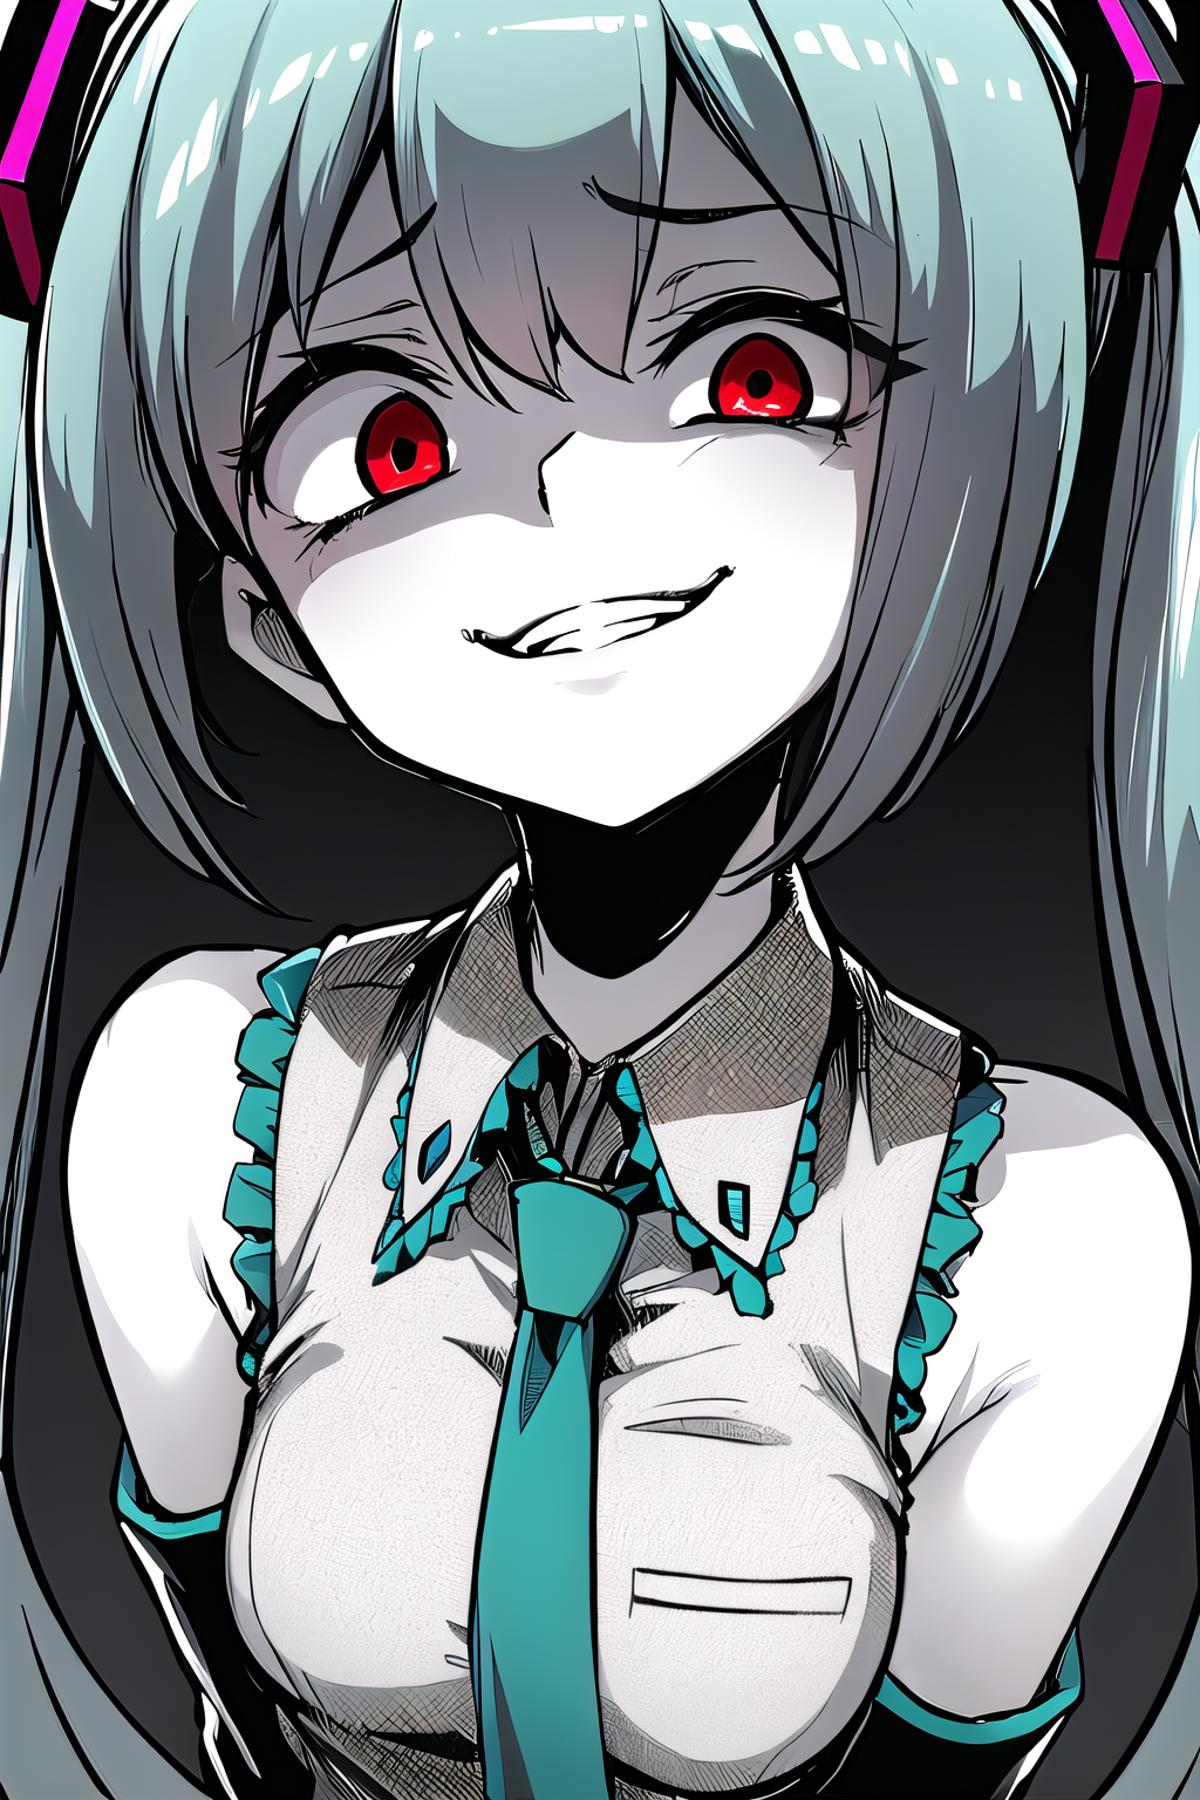 A girl with anime-like features is wearing a white dress, with a blue bow tie and a green bow on her shirt. She has long hair and is smiling, wearing a tie that is halfway undone. The image is in black and white, except for the girl's eyes, which are red.